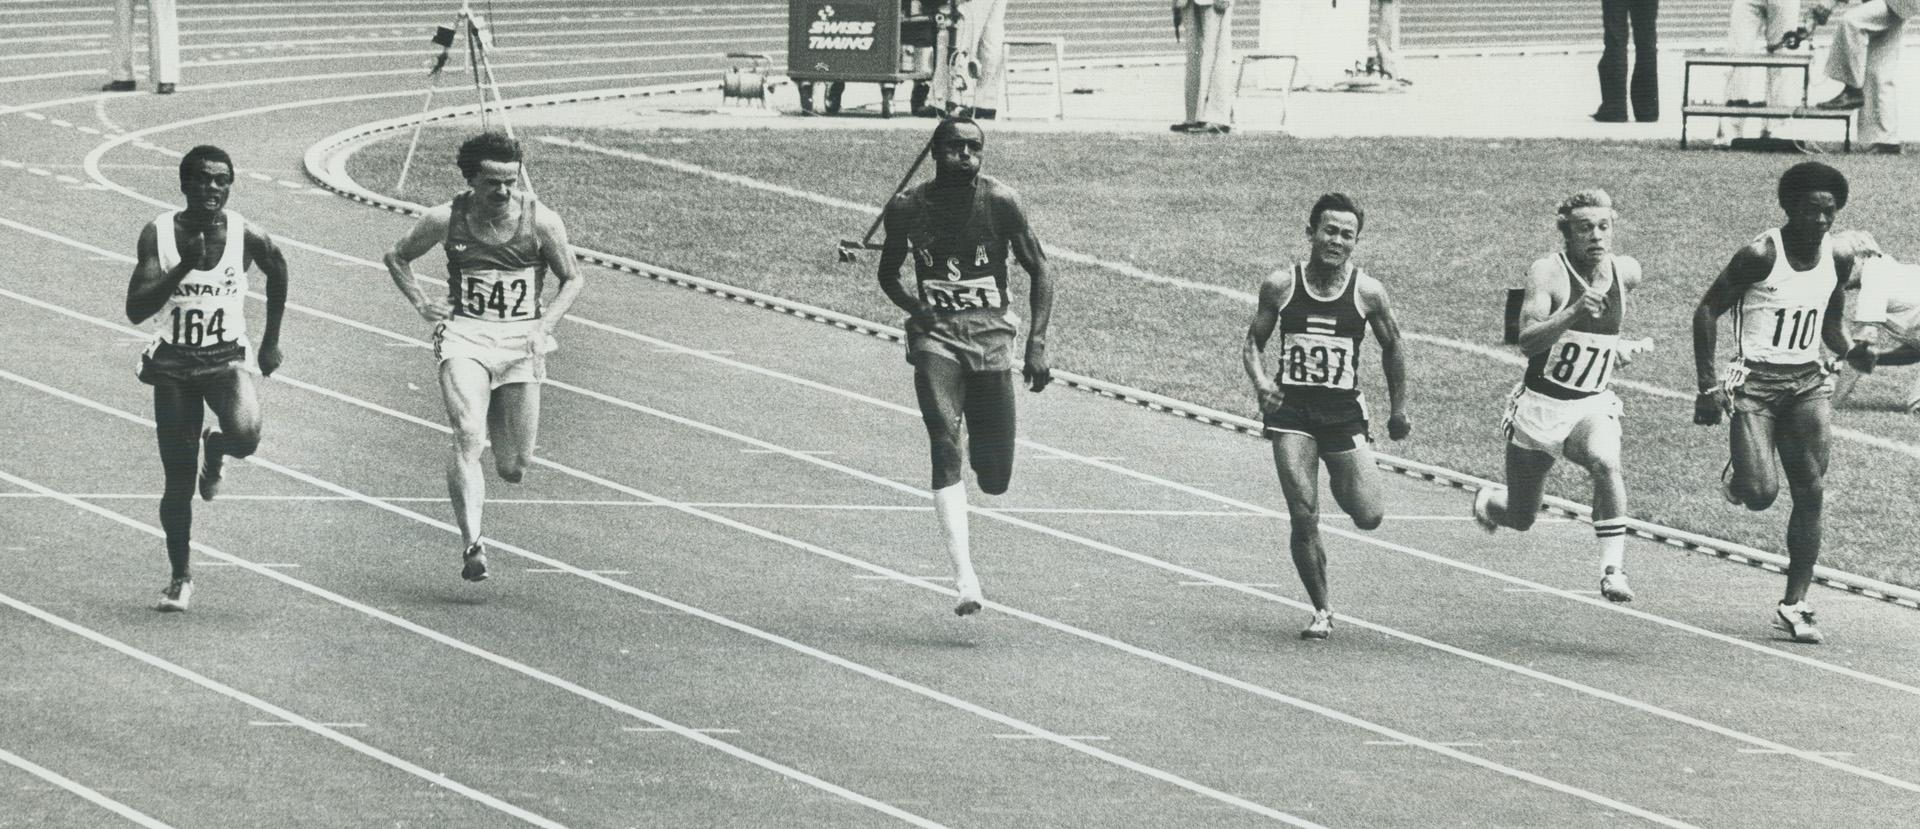 Sports - Olympics - (1976) - Montreal - Events - Track